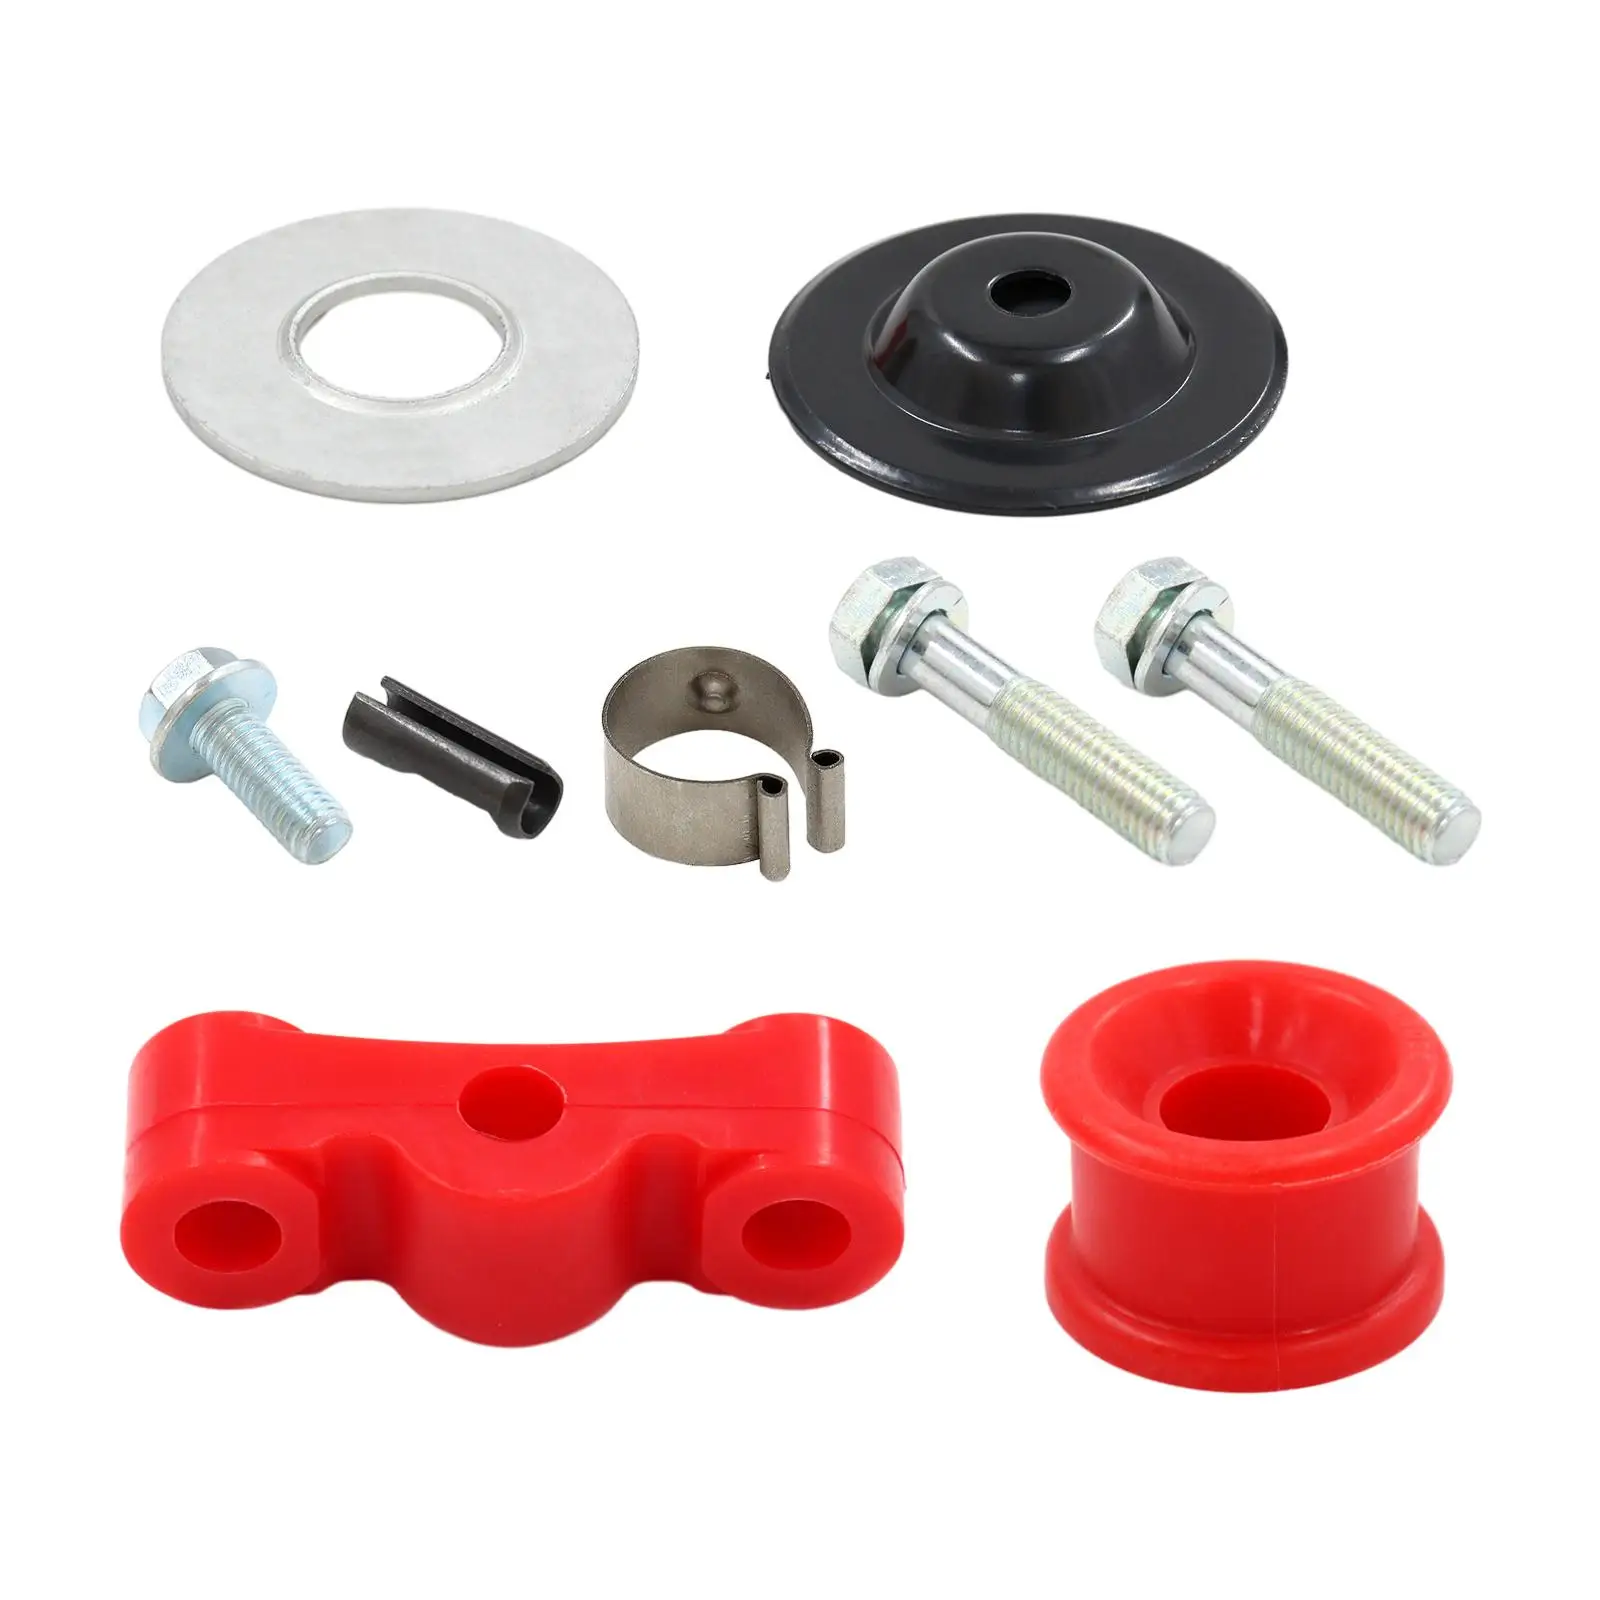 Red Shift Linkage Bushings Kit Replacement C Clip and Bolt Auto Accessories for Honda with B Series Swap Civic Crx Durable